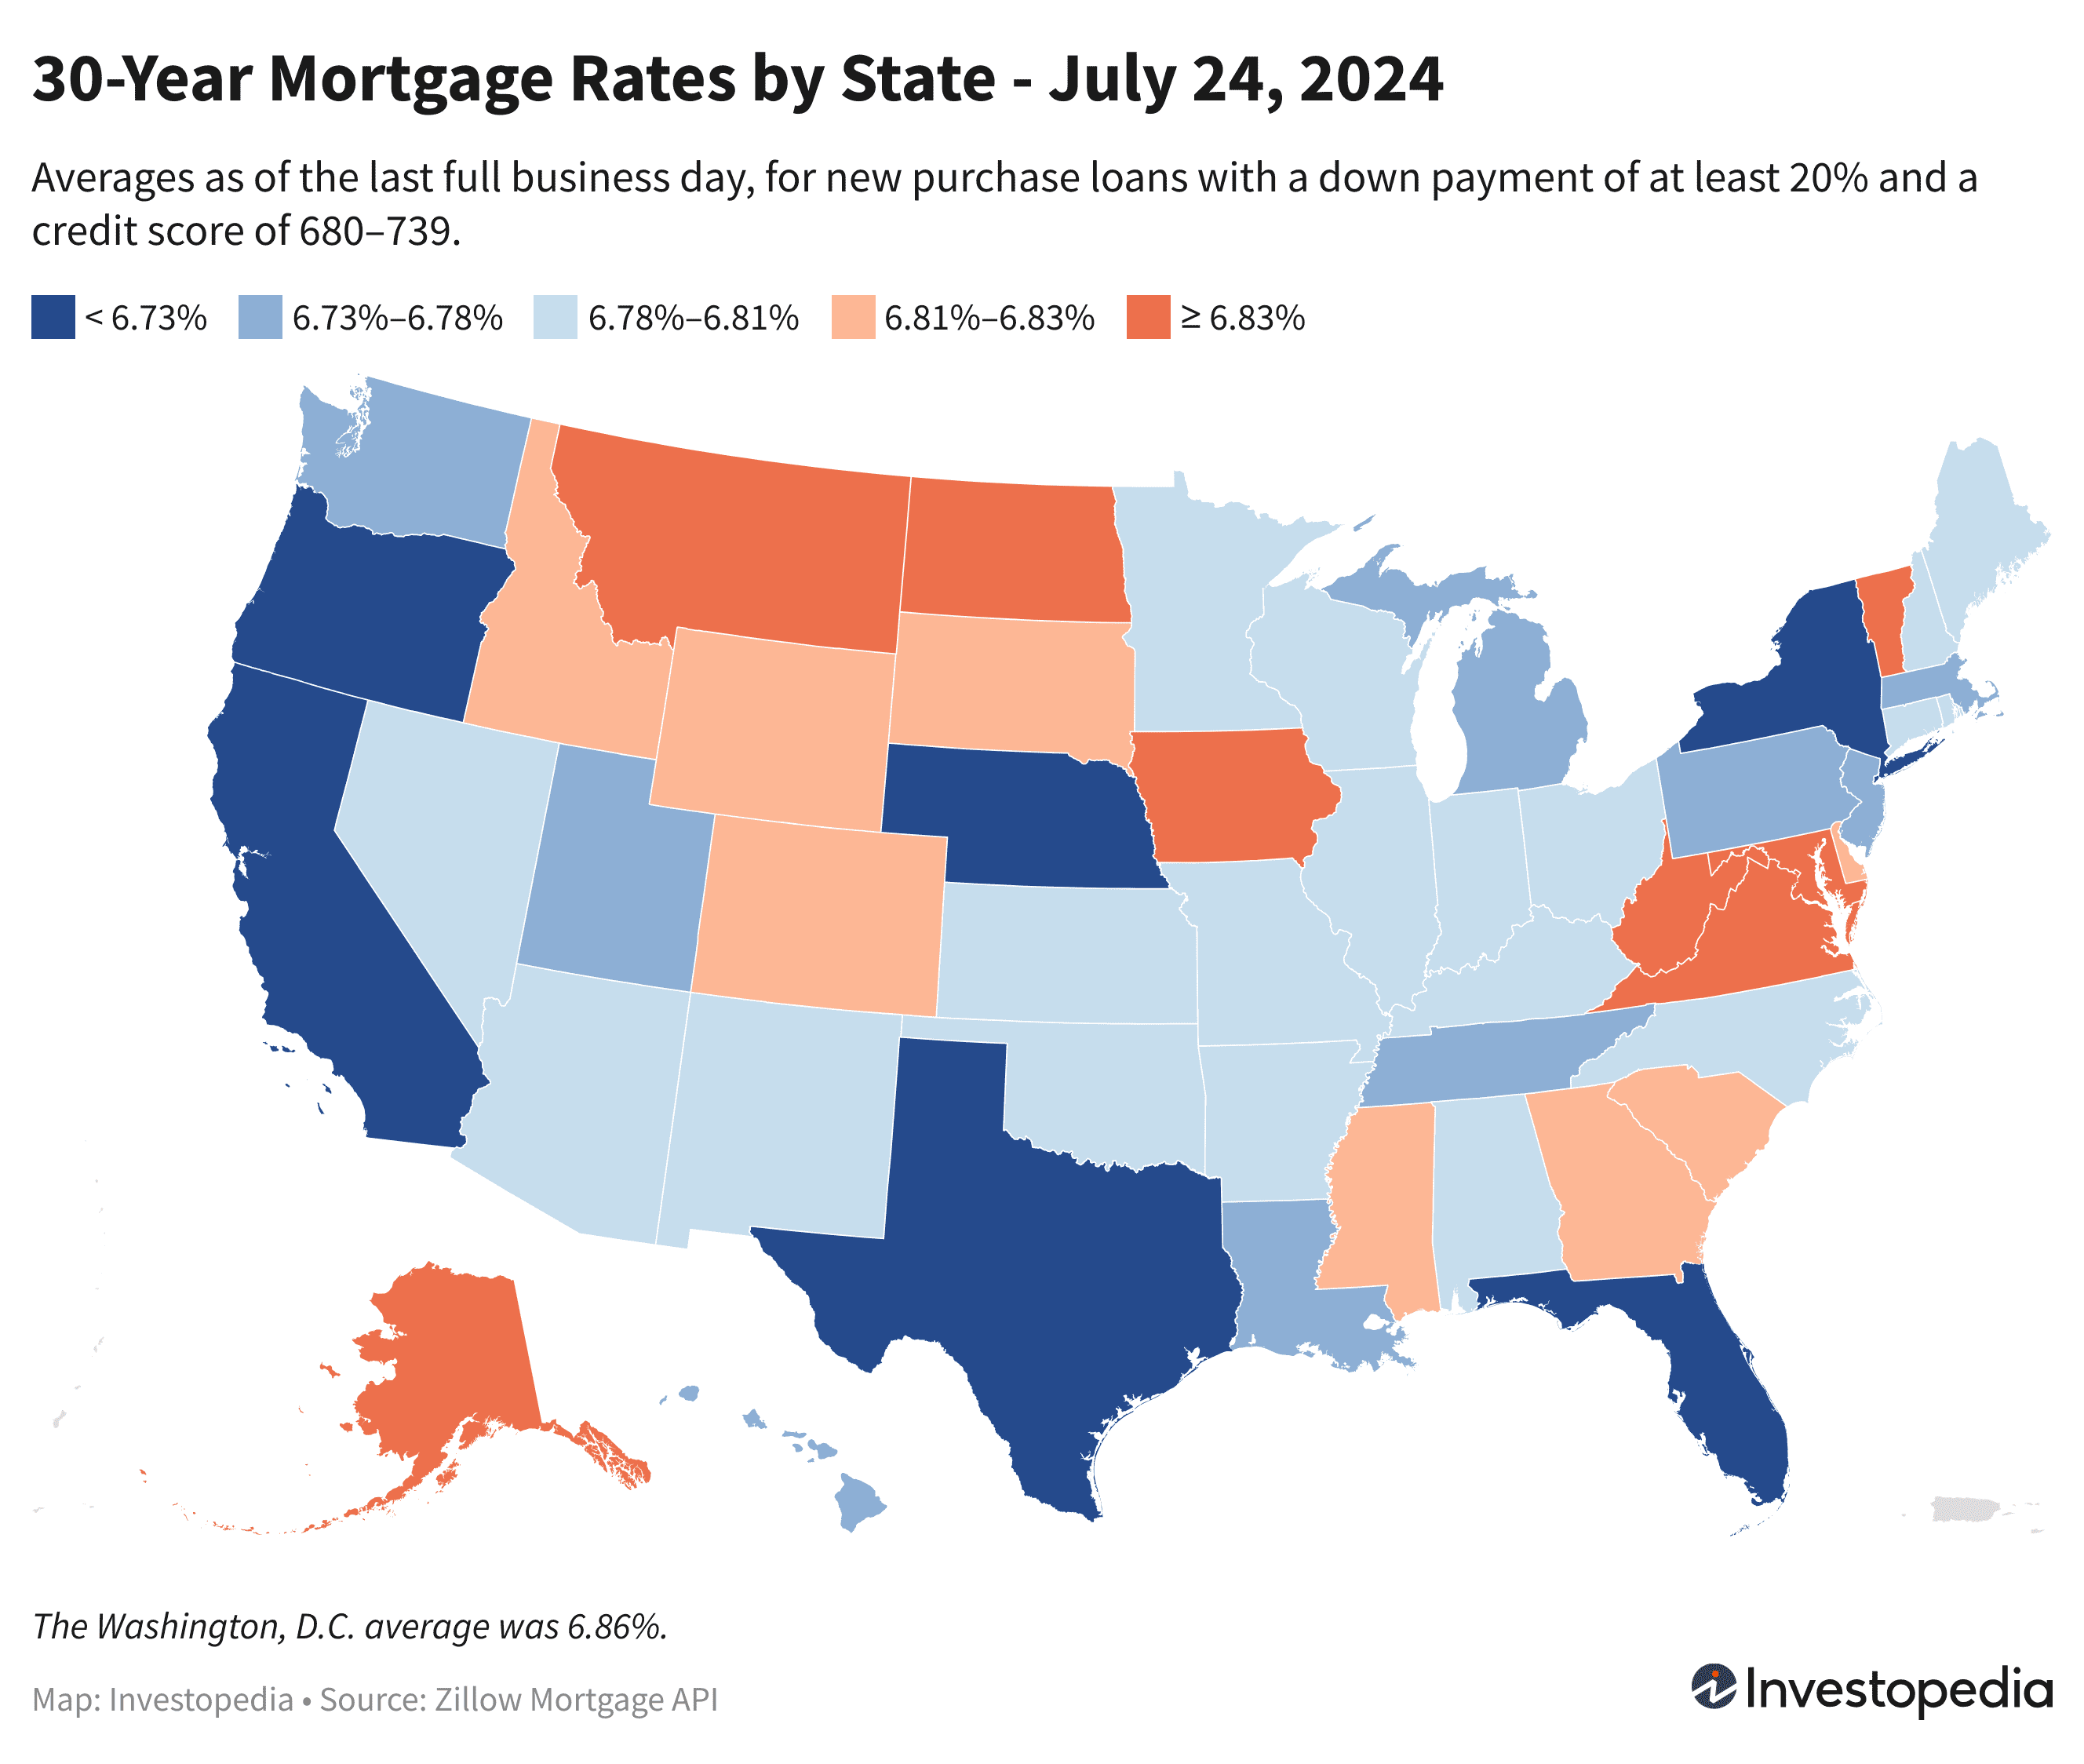 Map of 30-year mortgage rates by state - July 24, 2024